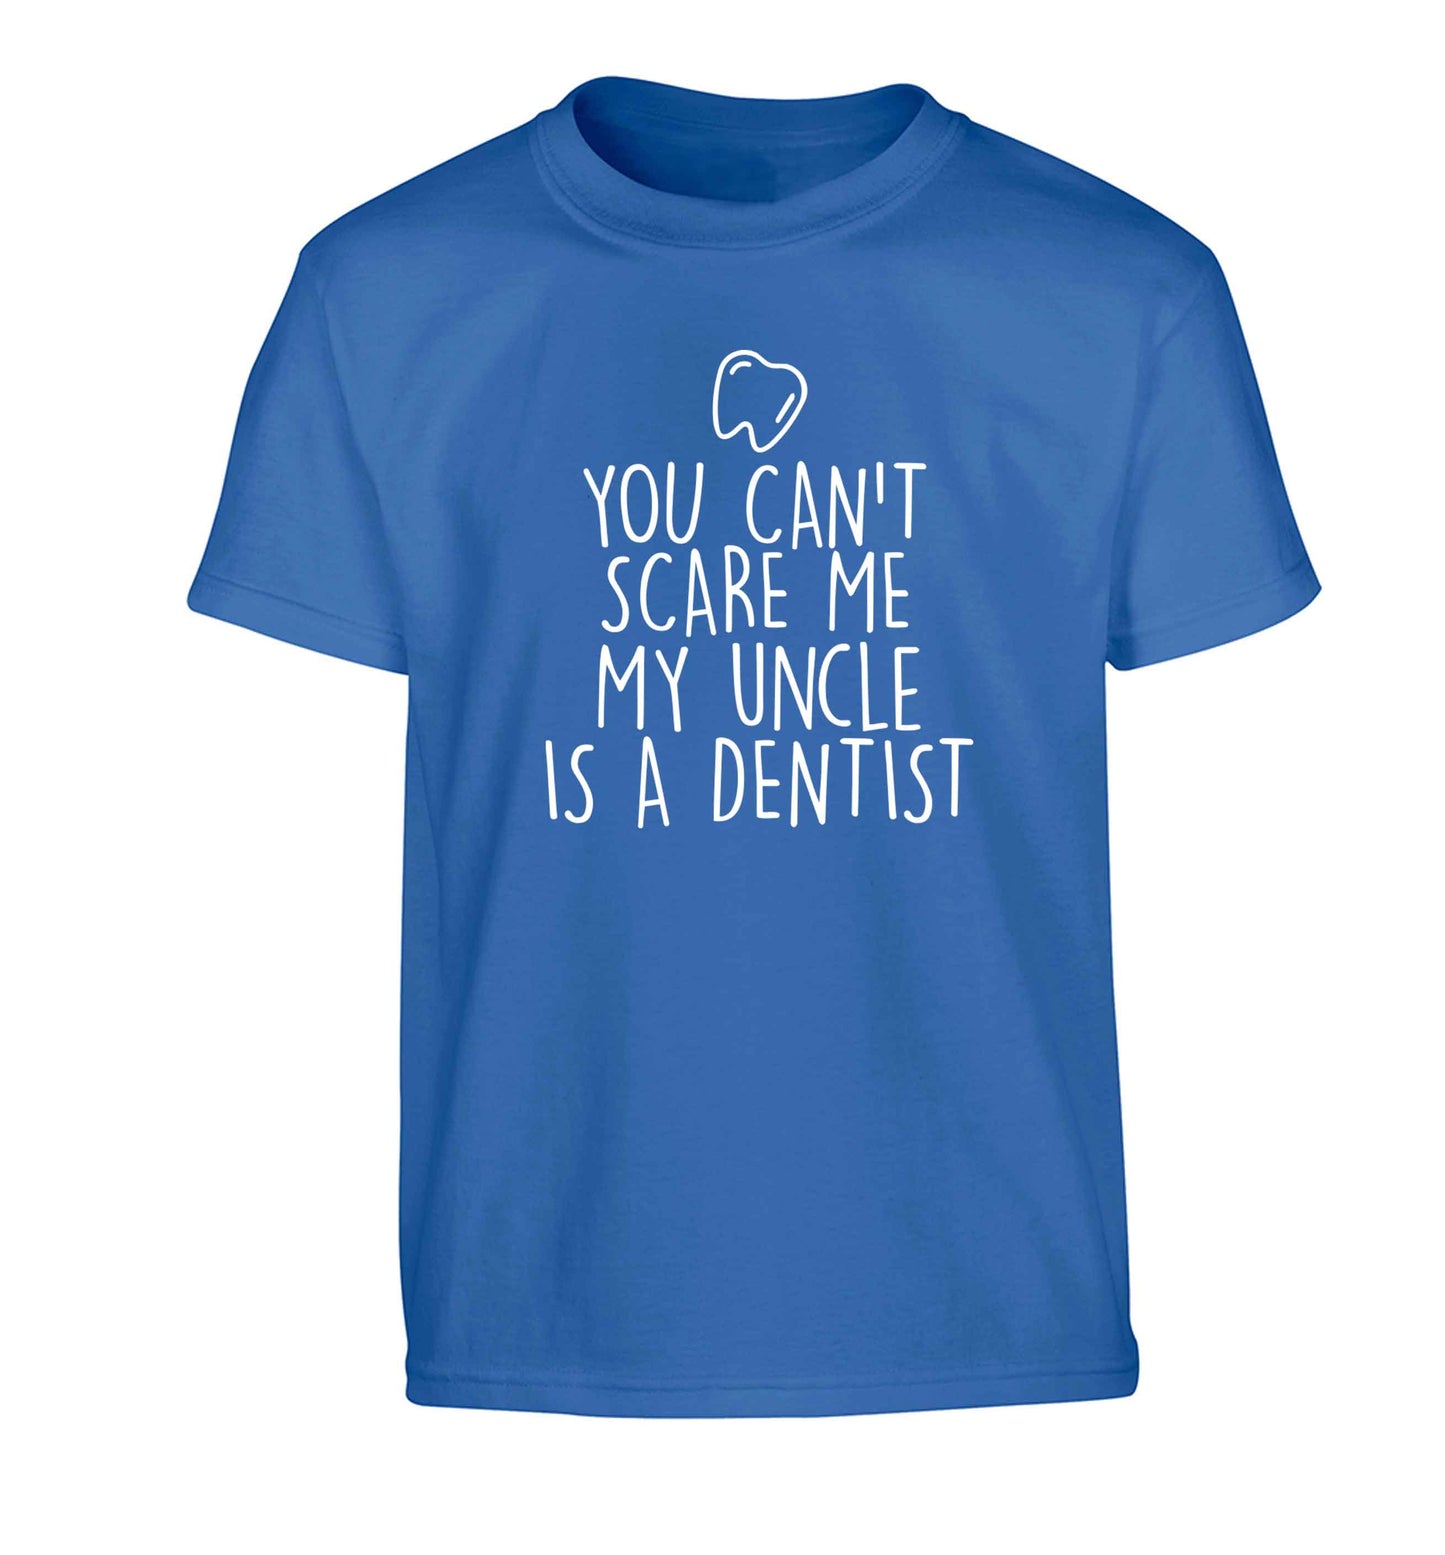 You can't scare me my uncle is a dentist Children's blue Tshirt 12-13 Years